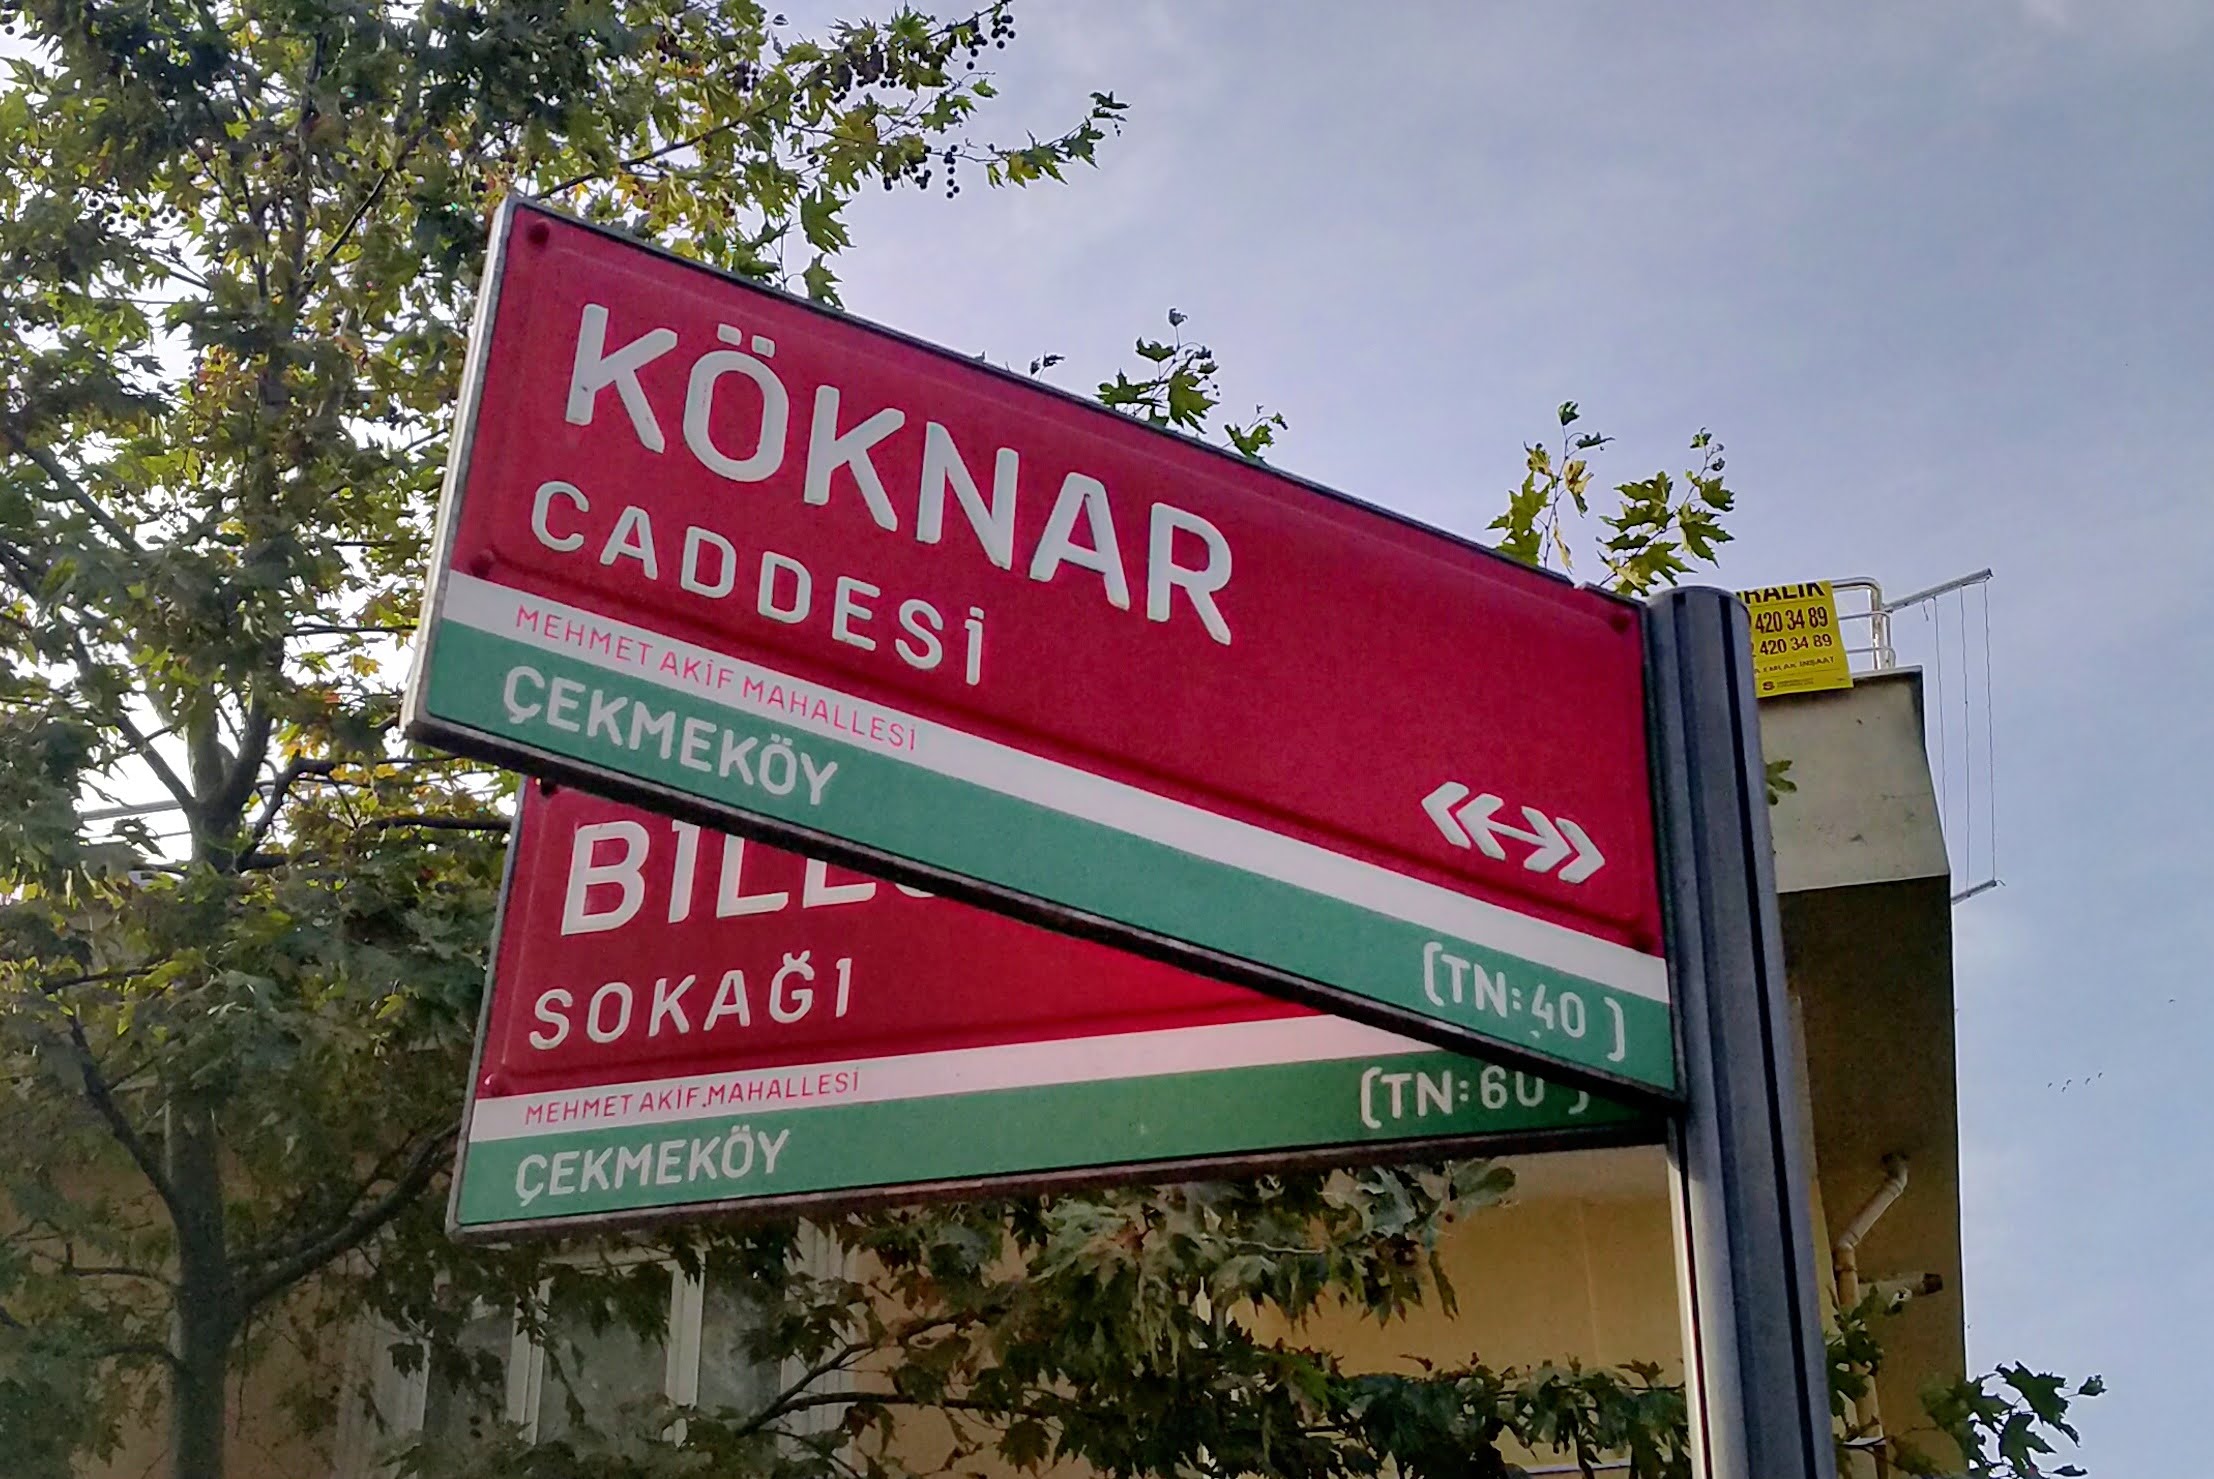 A post with two signs on it, one partially covering the other. The signs
are colored red with a thin white strip, then a thick green strip at the
bottom.
The front one says:
KÖKNAR CADDESİ ↞↠, [on white strip] MEHMET AKİF MAHALLESİ, [on green
strip] ÇEKMEKÖY (TN:40 ).
The one behind says:
BİL... SOKAĞI, [on white strip] MEHMET AKİF MAHALLESİ, [on green strip]
ÇEKMEKÖY (TN:60 )
